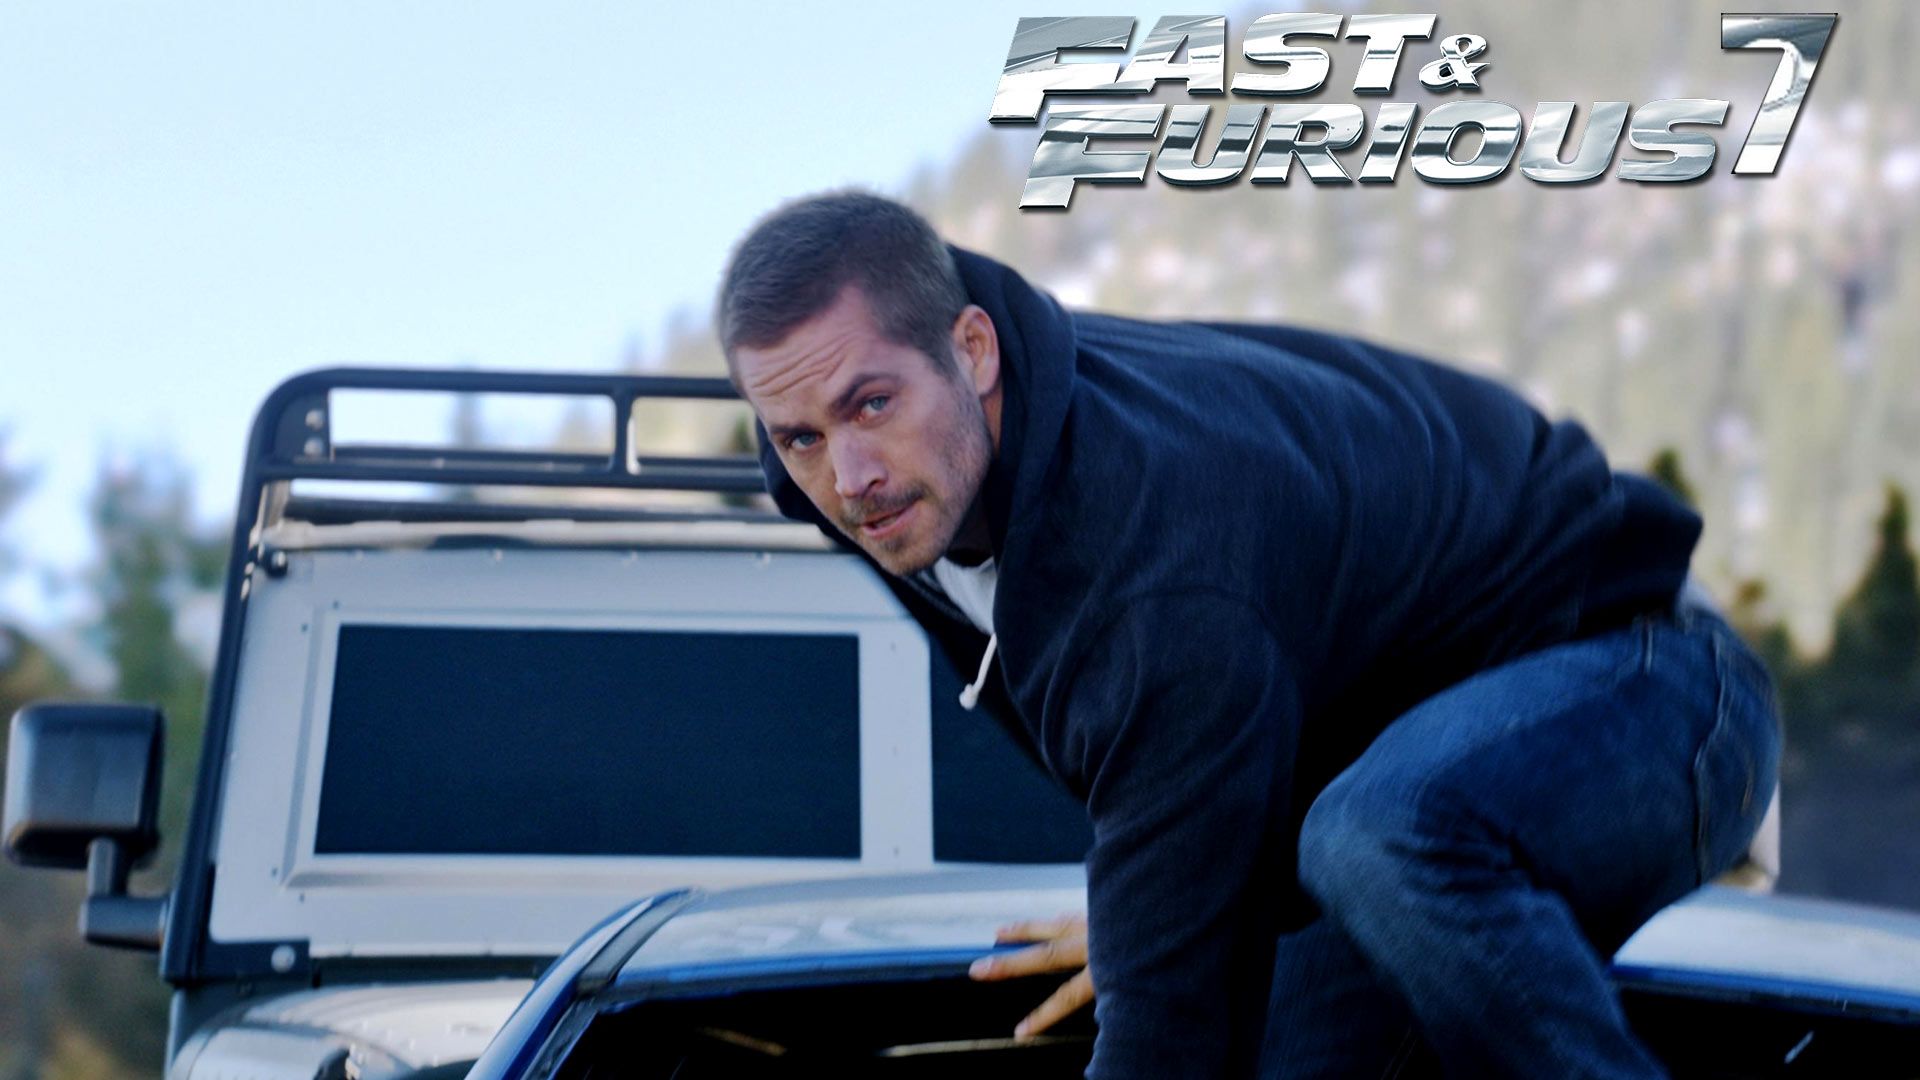 Fast and furious 7 wallpapers – Free full hd wallpapers for 1080p ...